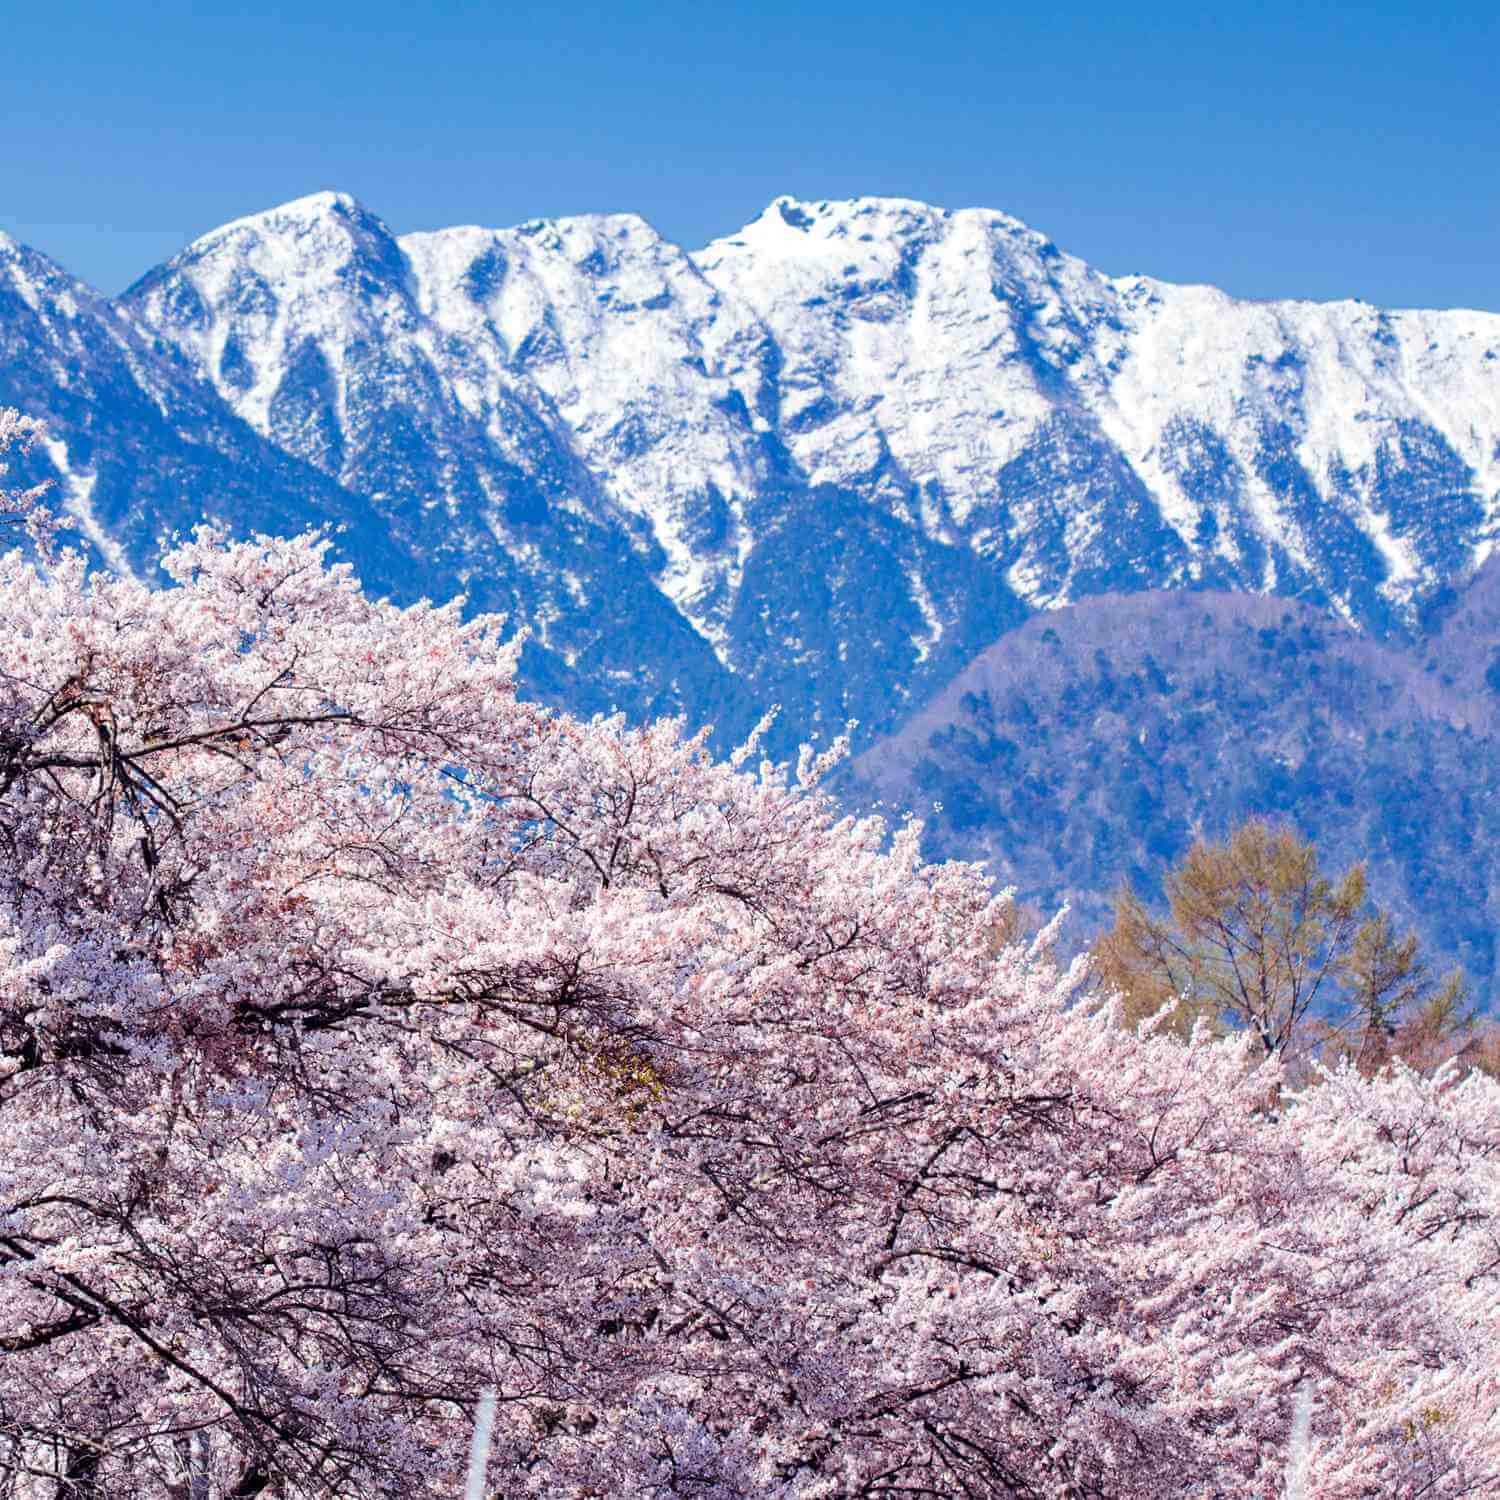 Photos: Spring Snow -The Amazing Contrast of Flowers and Mountain Snow